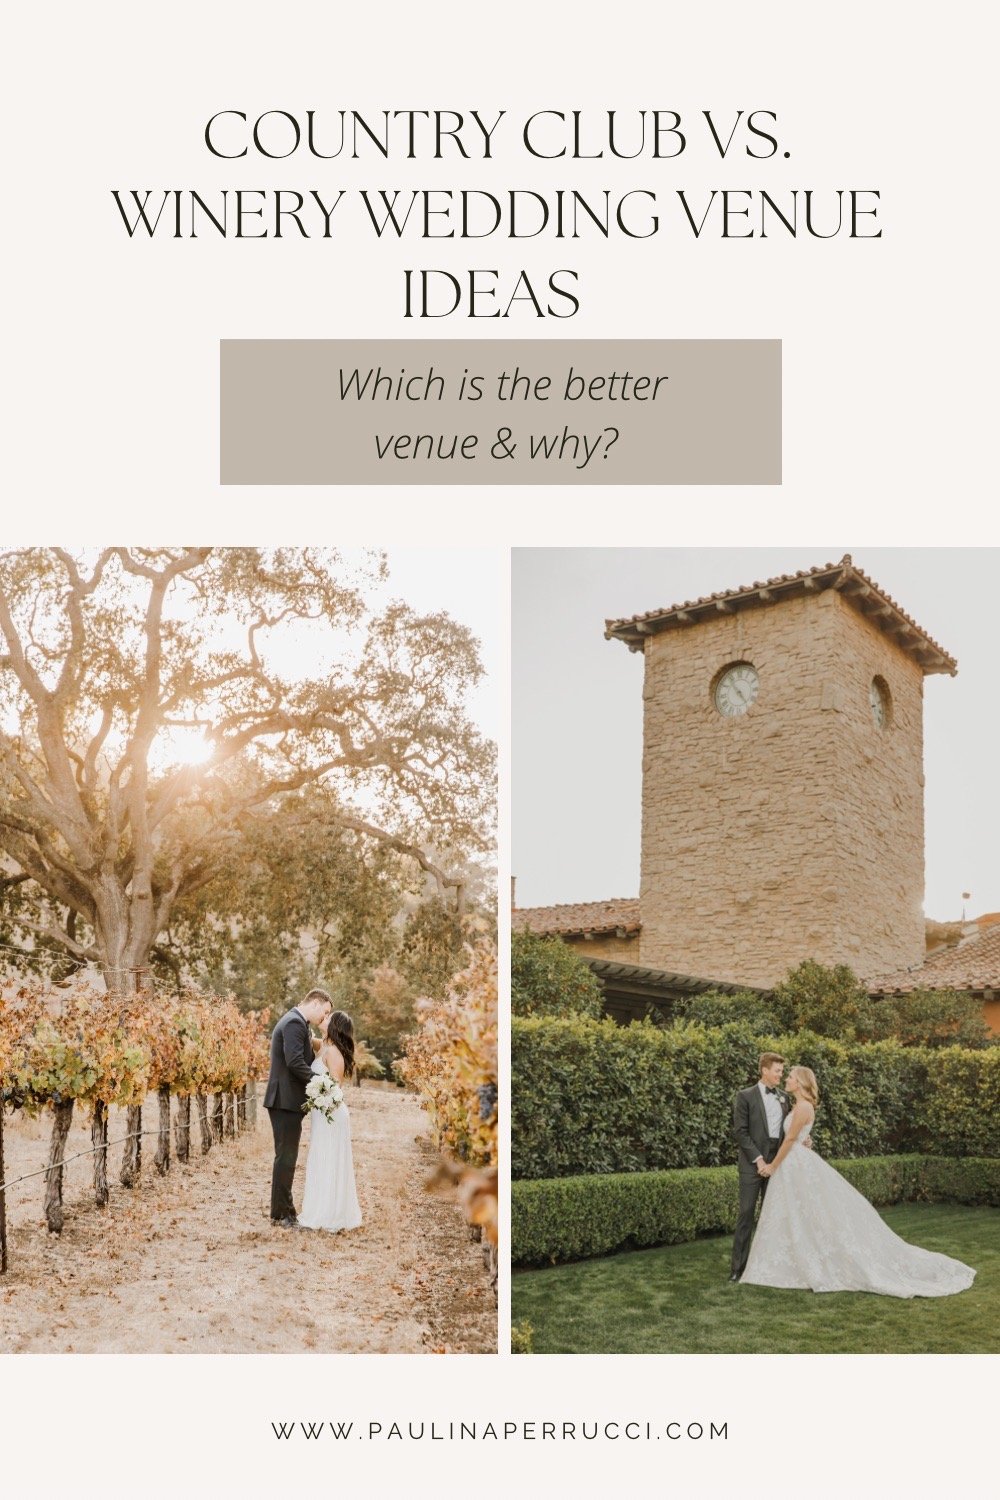 Country Club or Winery for a Wedding Venue, Which Is The Better Choice? 